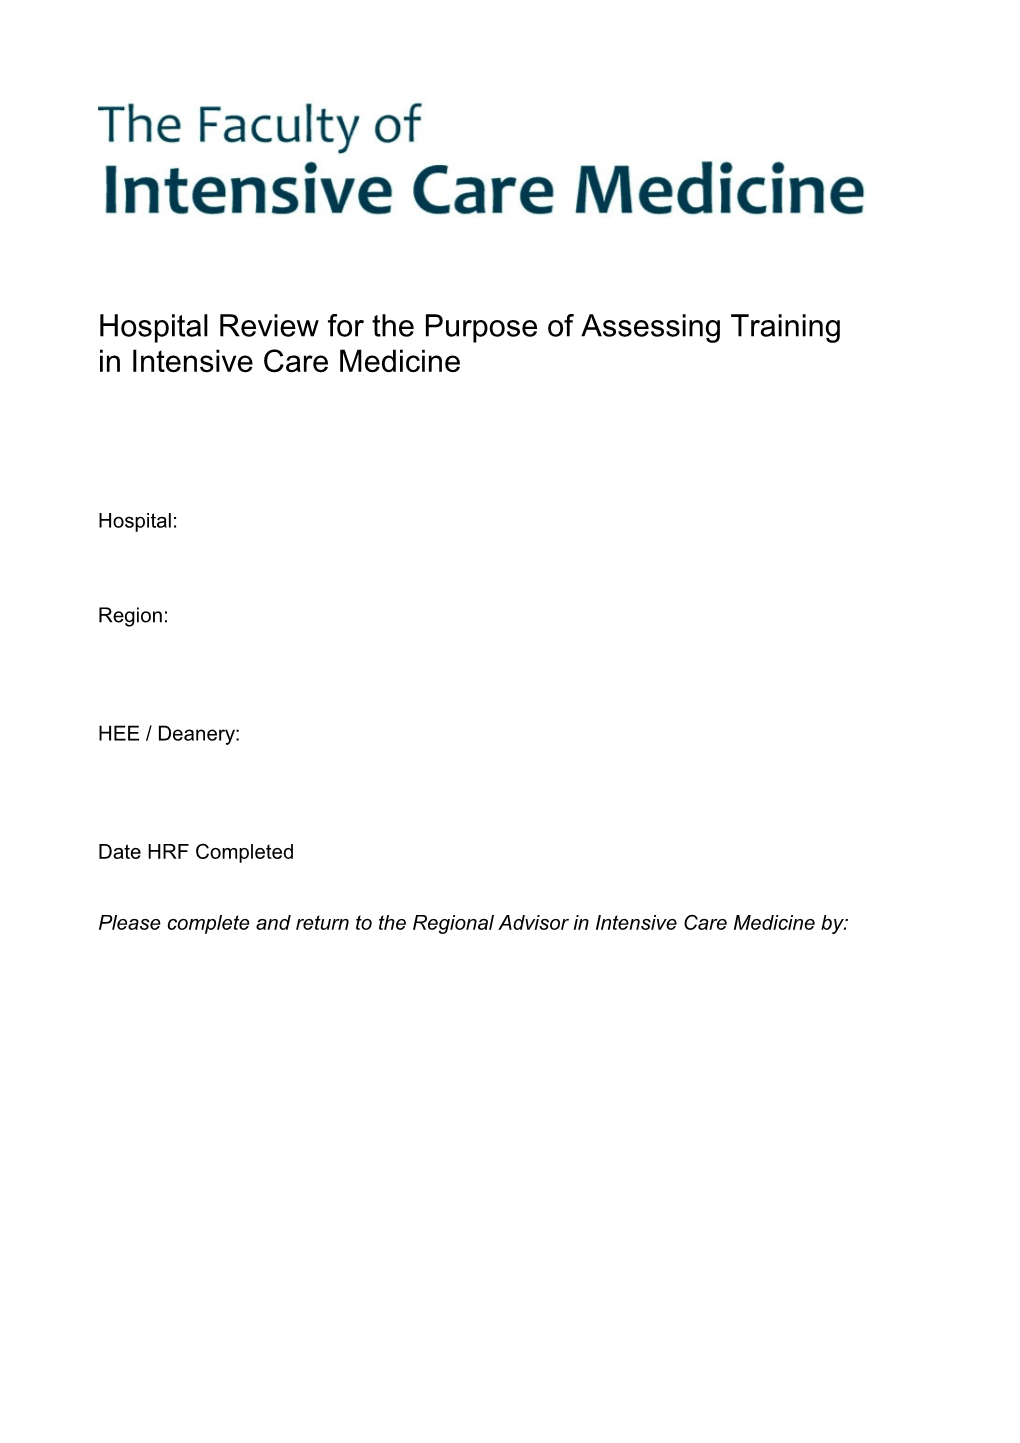 Hospital Review for the Purpose of Assessing Training in Intensive Care Medicine